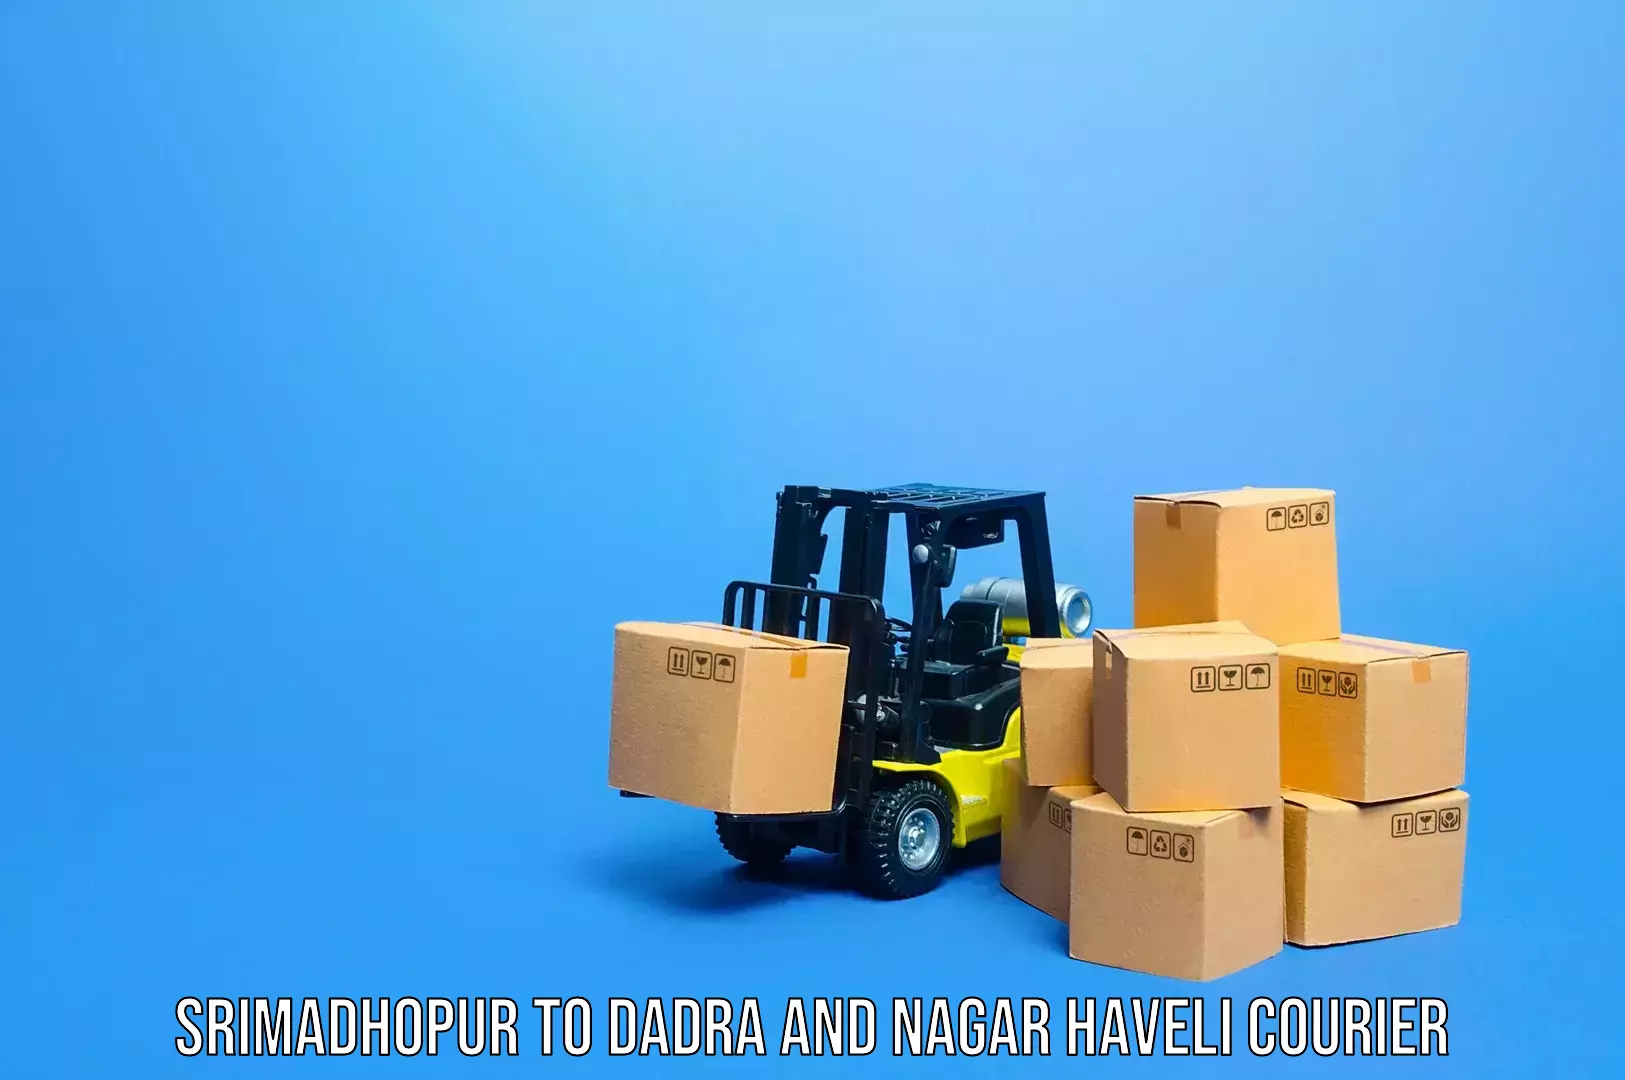 Luggage delivery system Srimadhopur to Dadra and Nagar Haveli